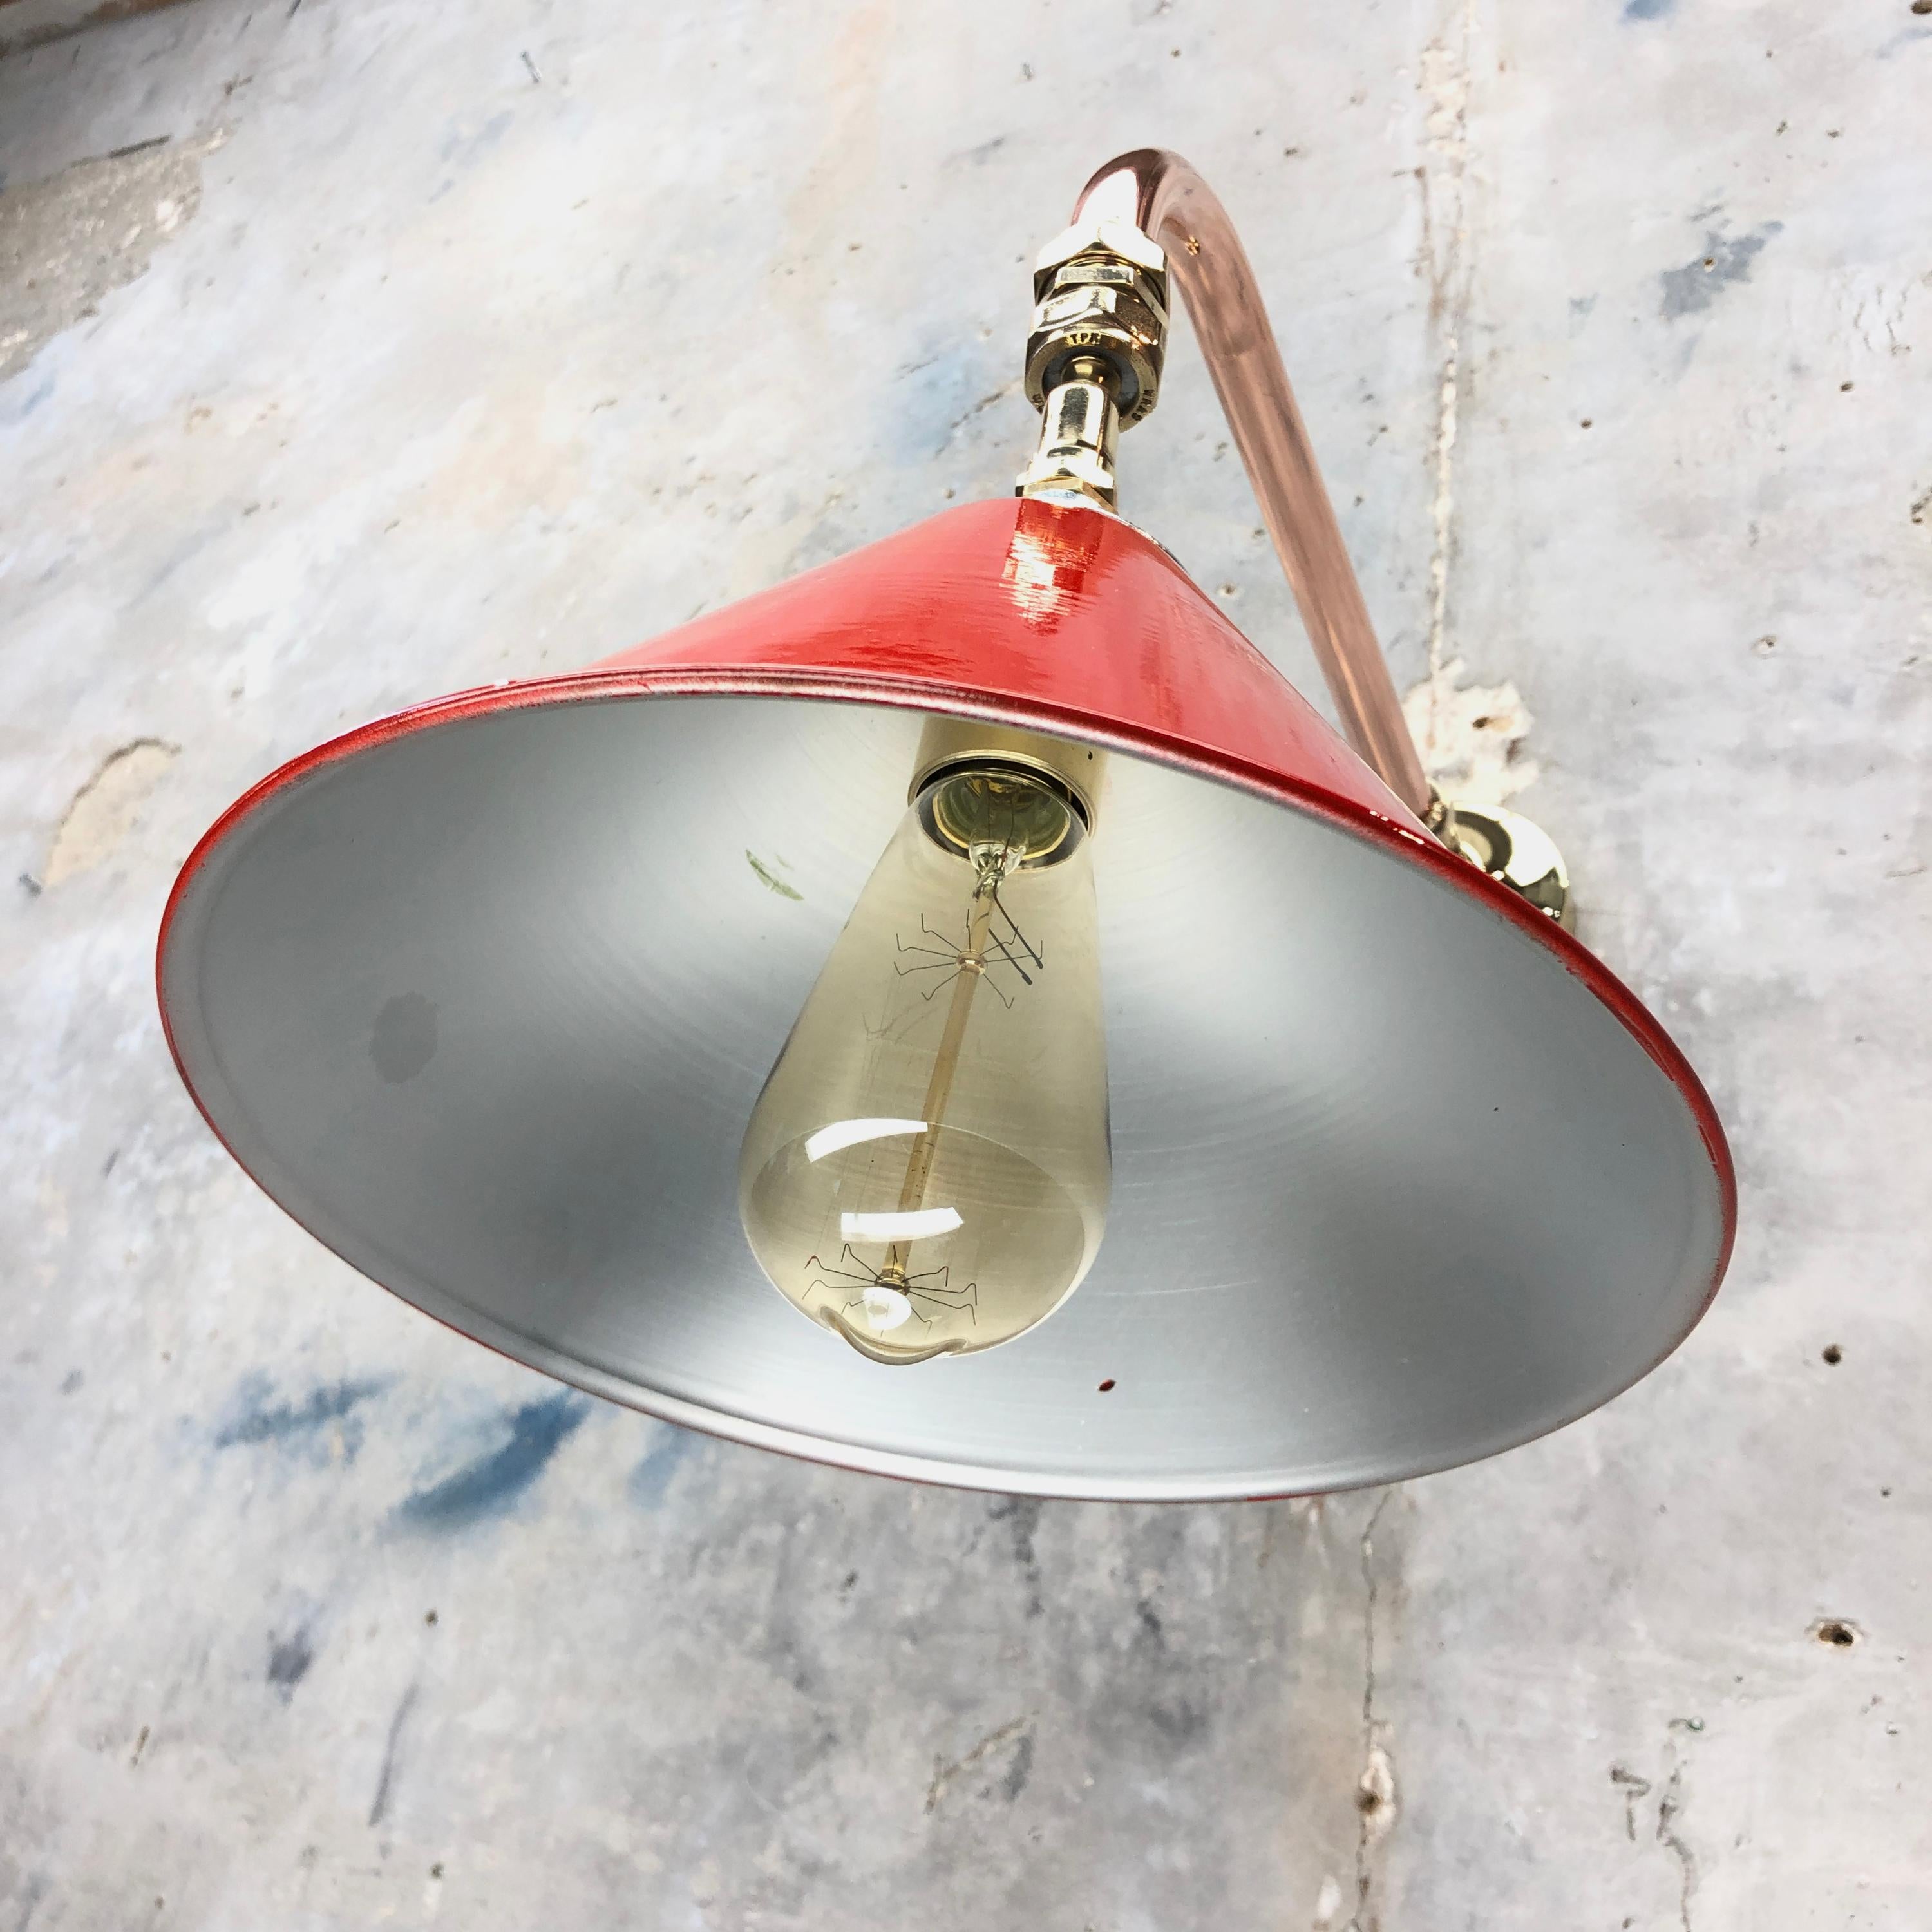 Late 20th Century 1980 British Army Lamp Shade in Red with Copper Cantilever Wall Lamp Edison Bulb For Sale